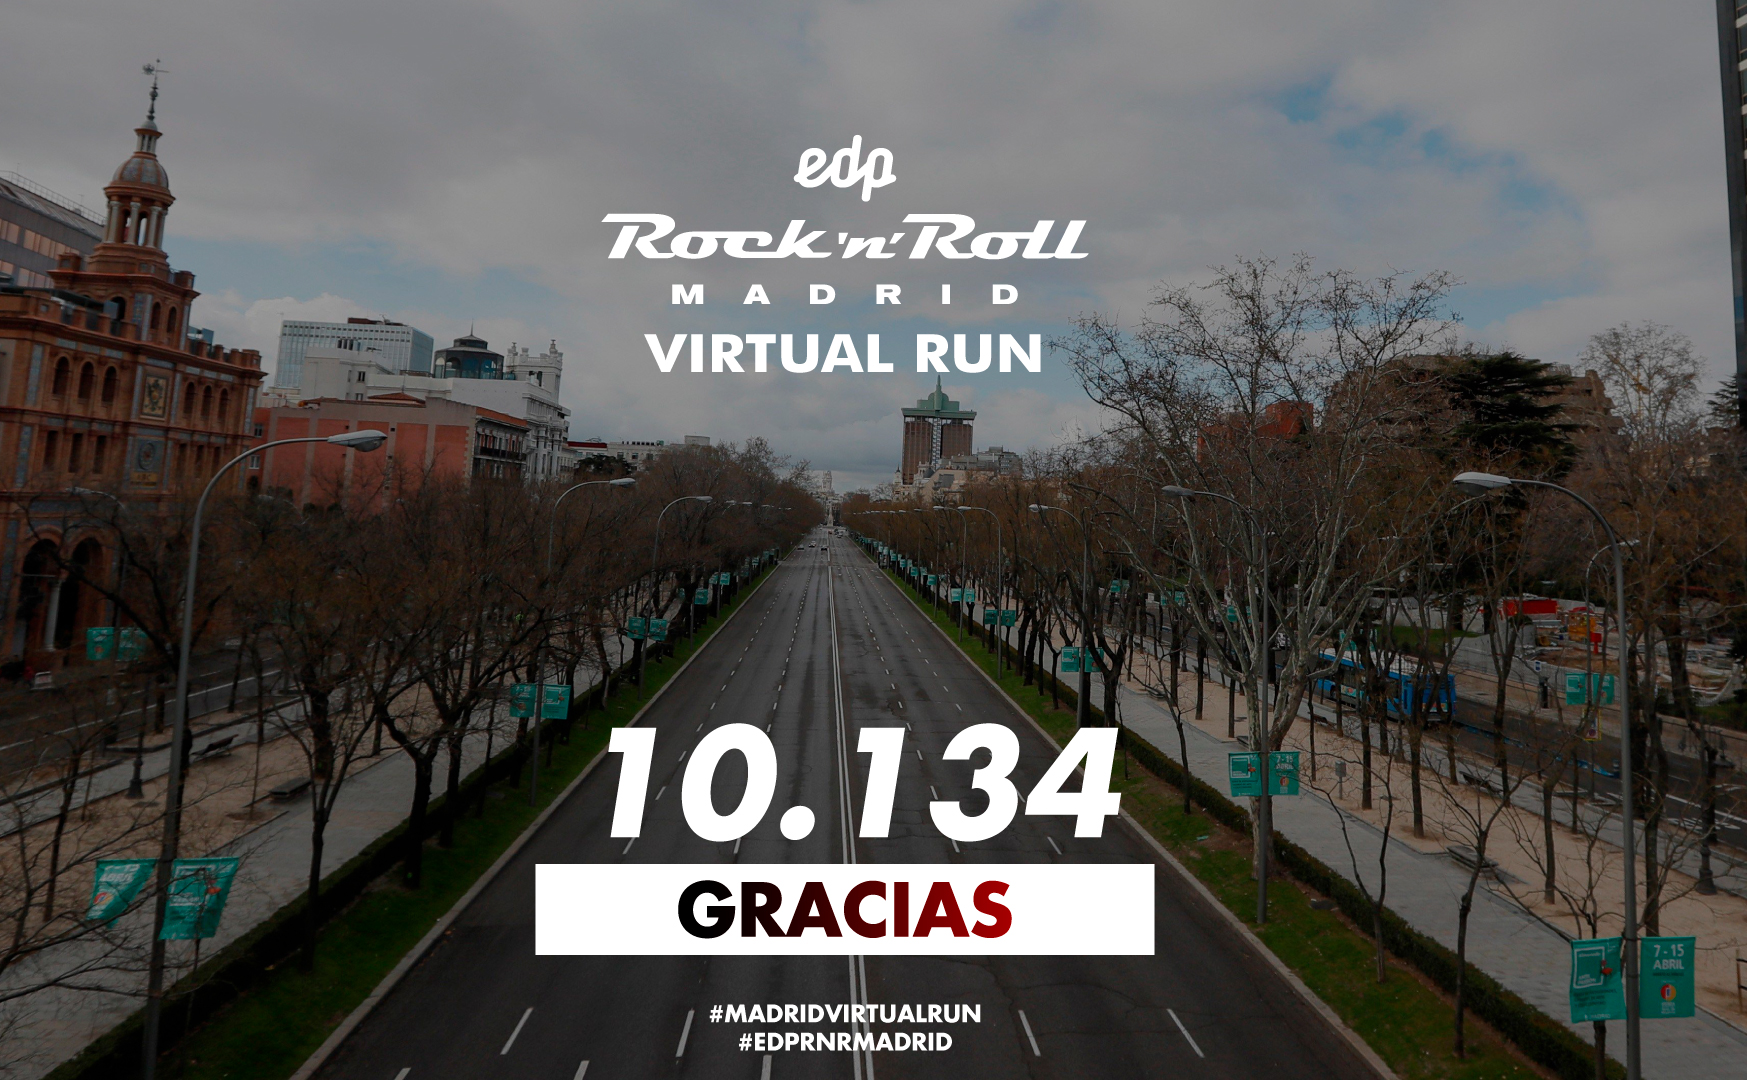 THE MADRID VIRTUAL RUN IS NOW THE EVENT WITH THE MOST PARTICIPATION IN SPAIN’S HISTORY!